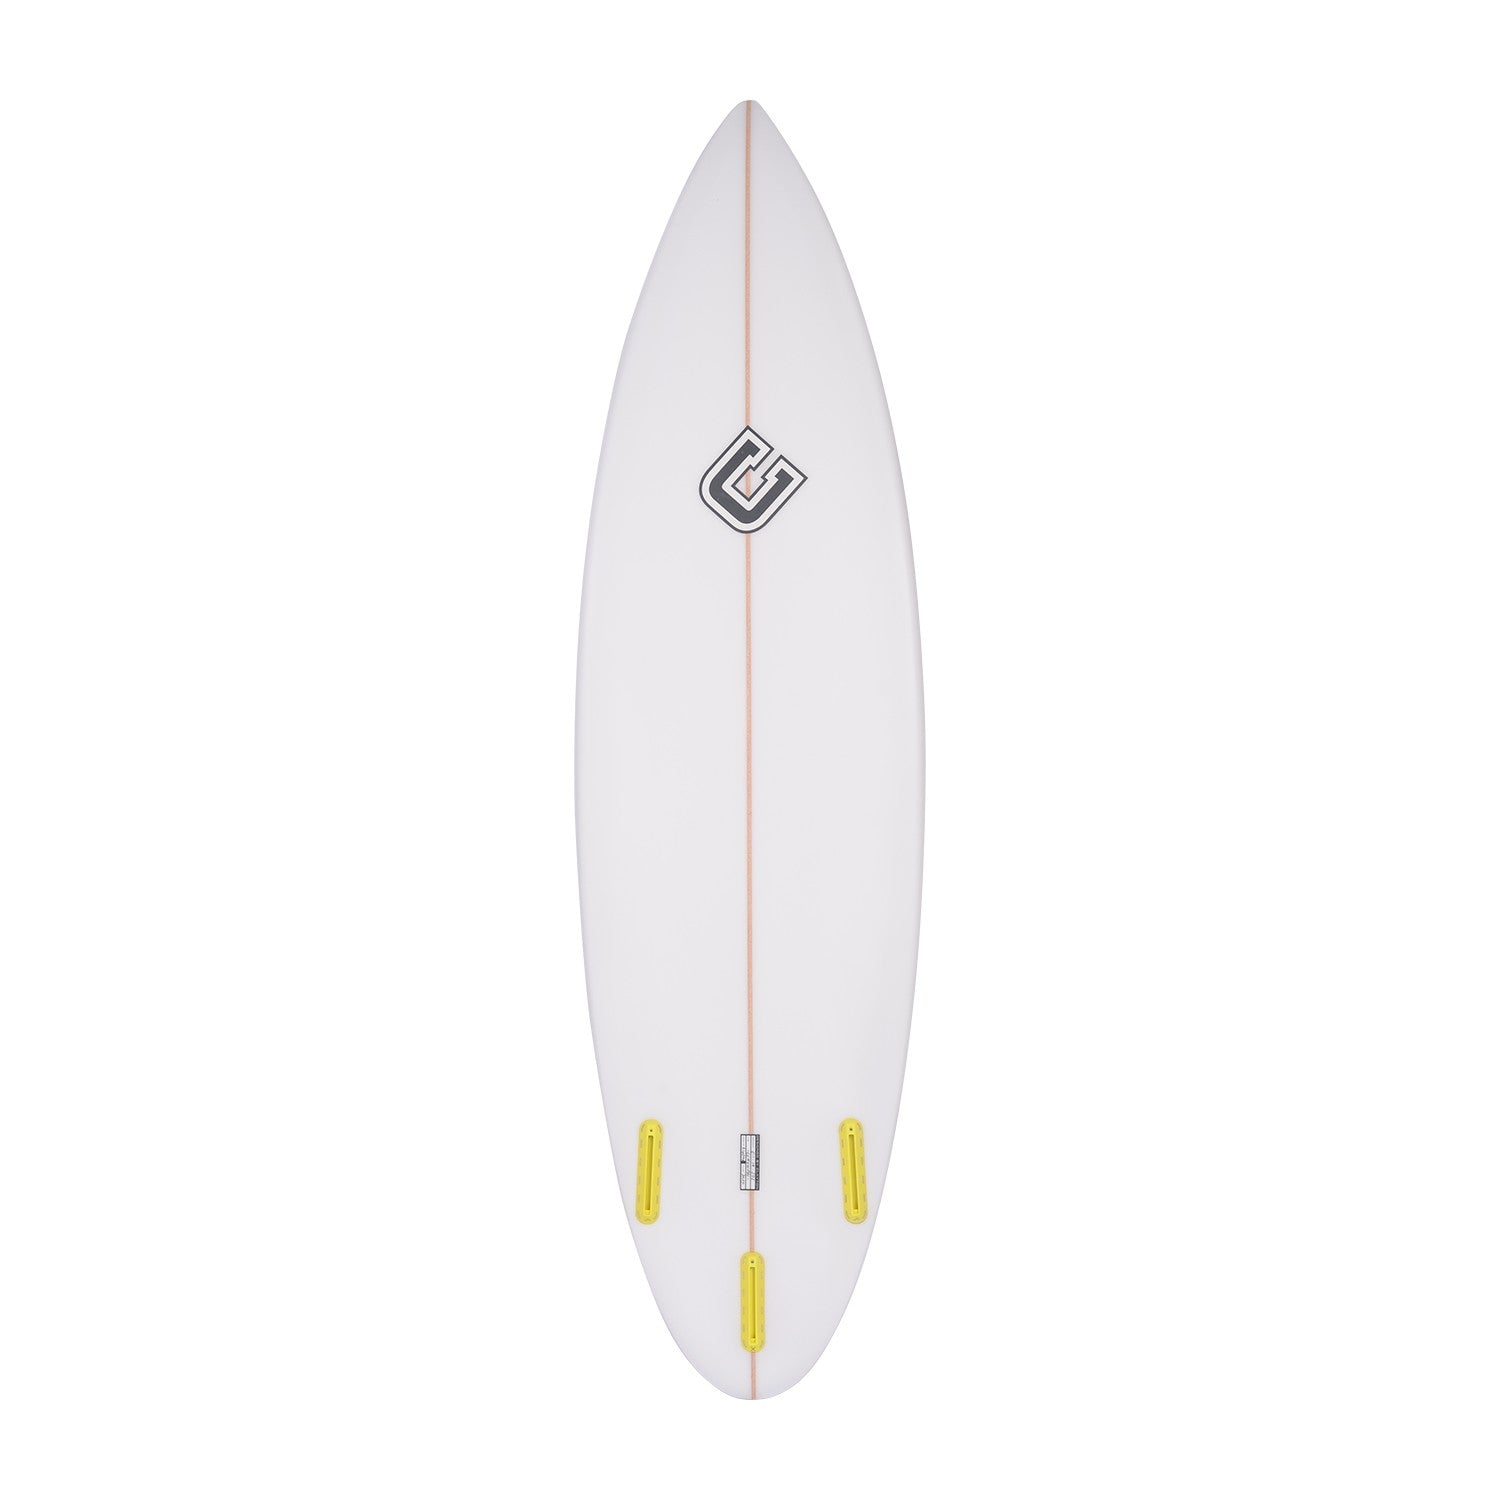 CLAYTON Surfboards - Clay10 Pro (PU) Futures - 6'2